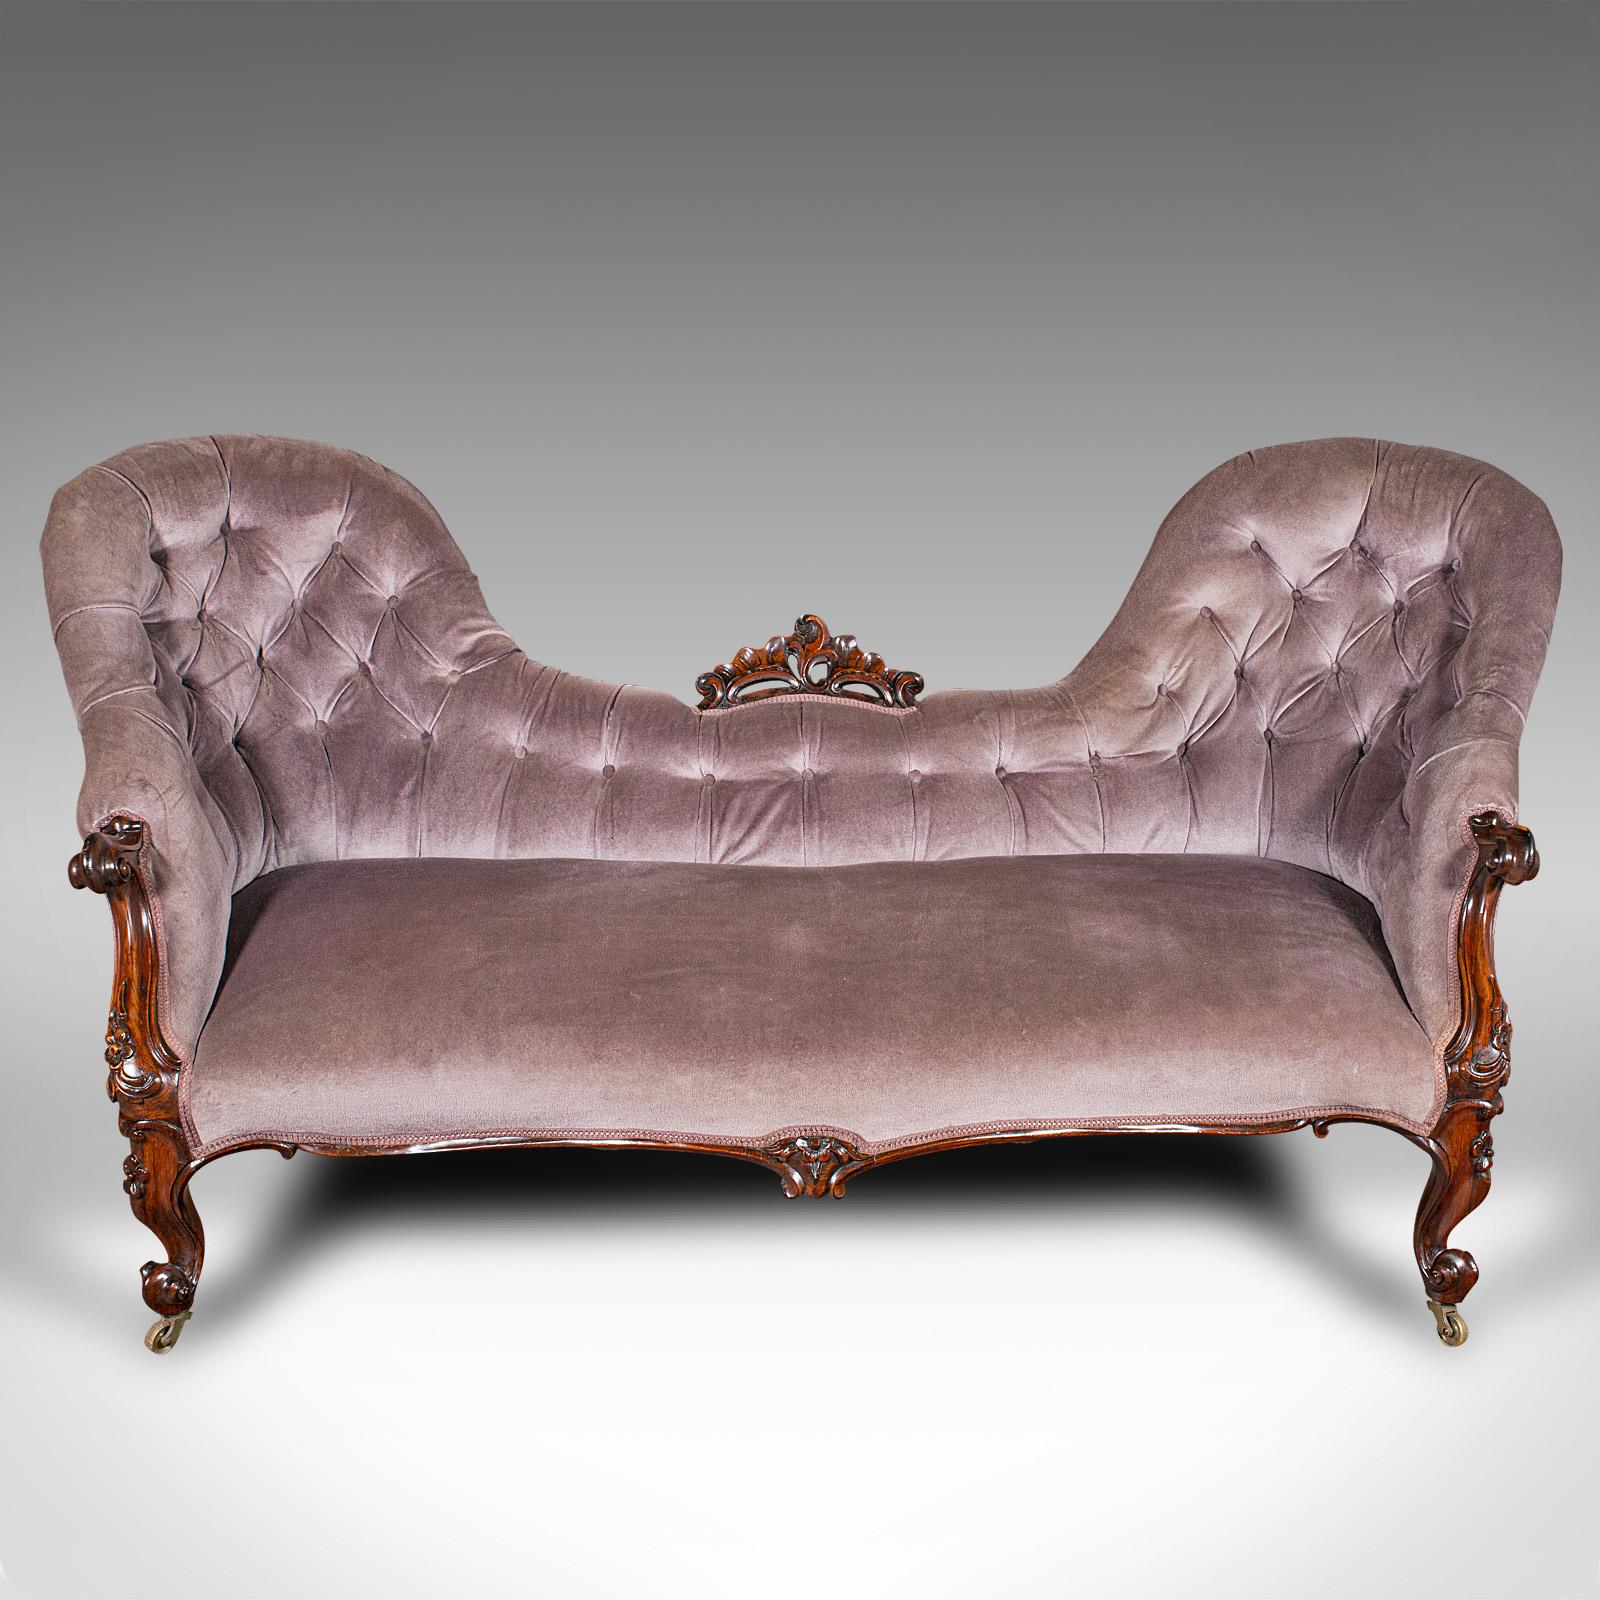 This is an antique double spoon back settee. An English, rosewood three seater ornate sofa, dating to the early Victorian period, circa 1840.

Striking form and a treat of carved craftsmanship
Displays a desirable aged patina and in good order